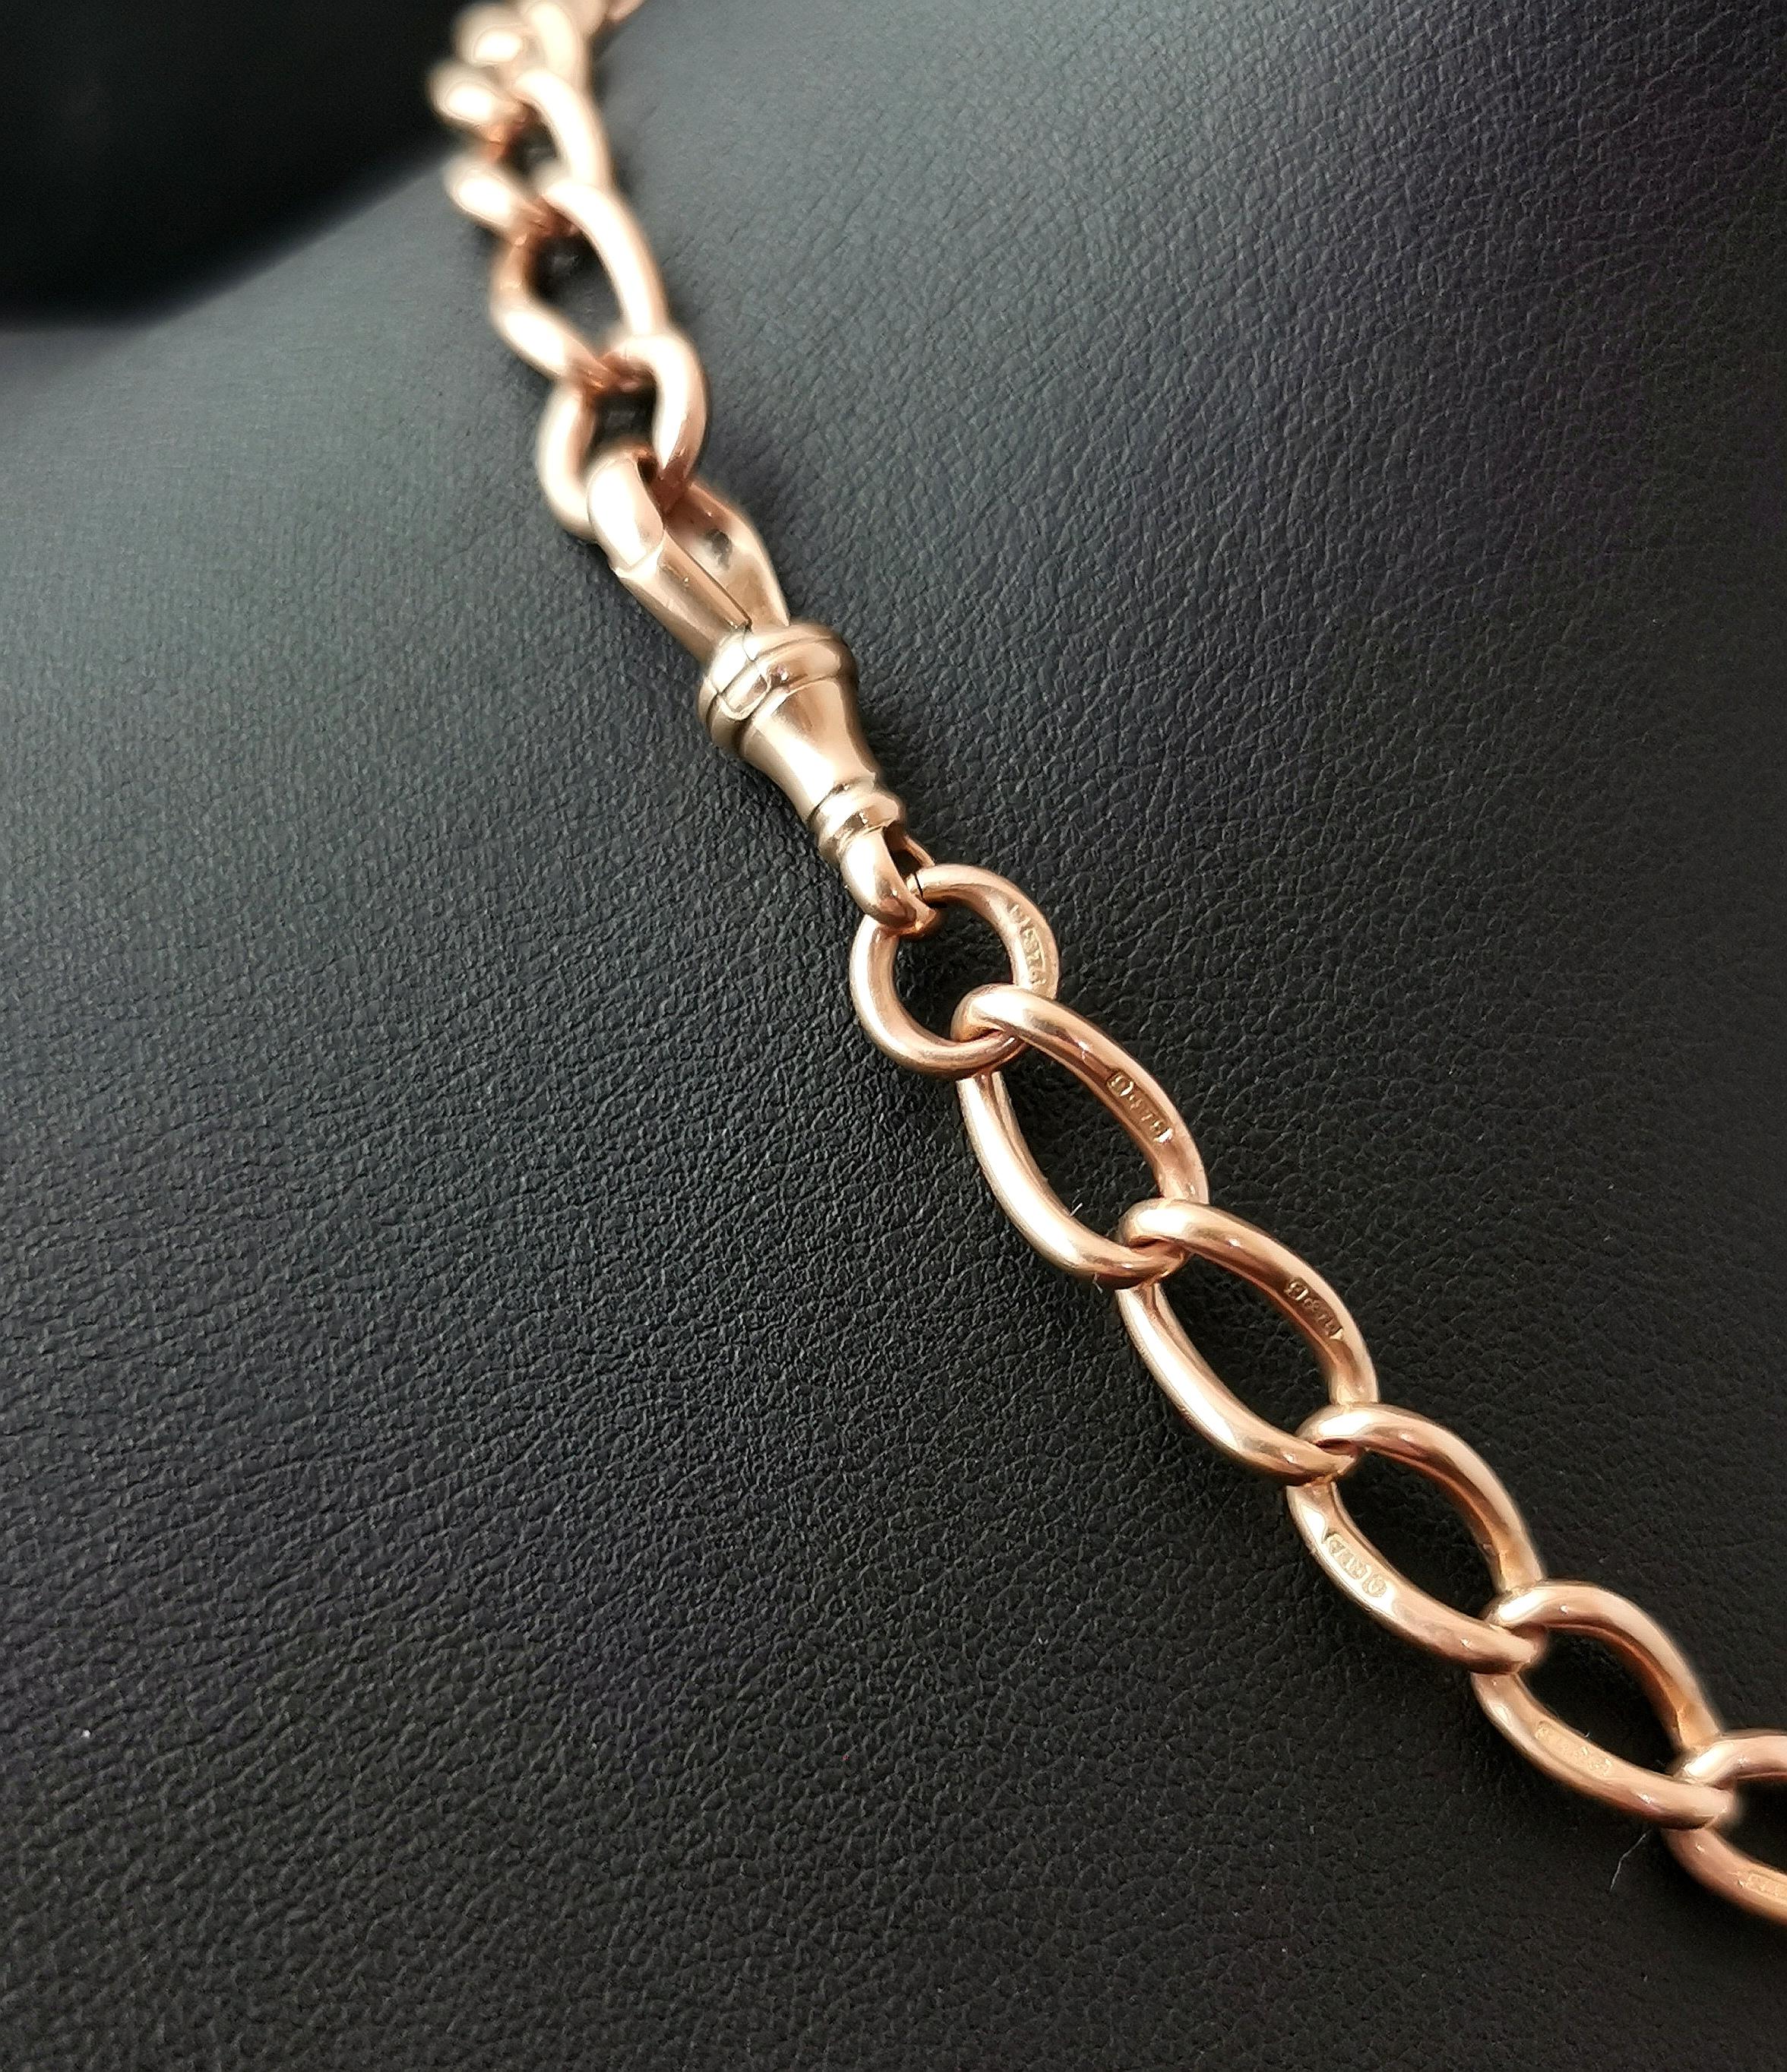 Antique 9k Gold Curb Link Albert Chain, Watch Chain Necklace Victorian 9